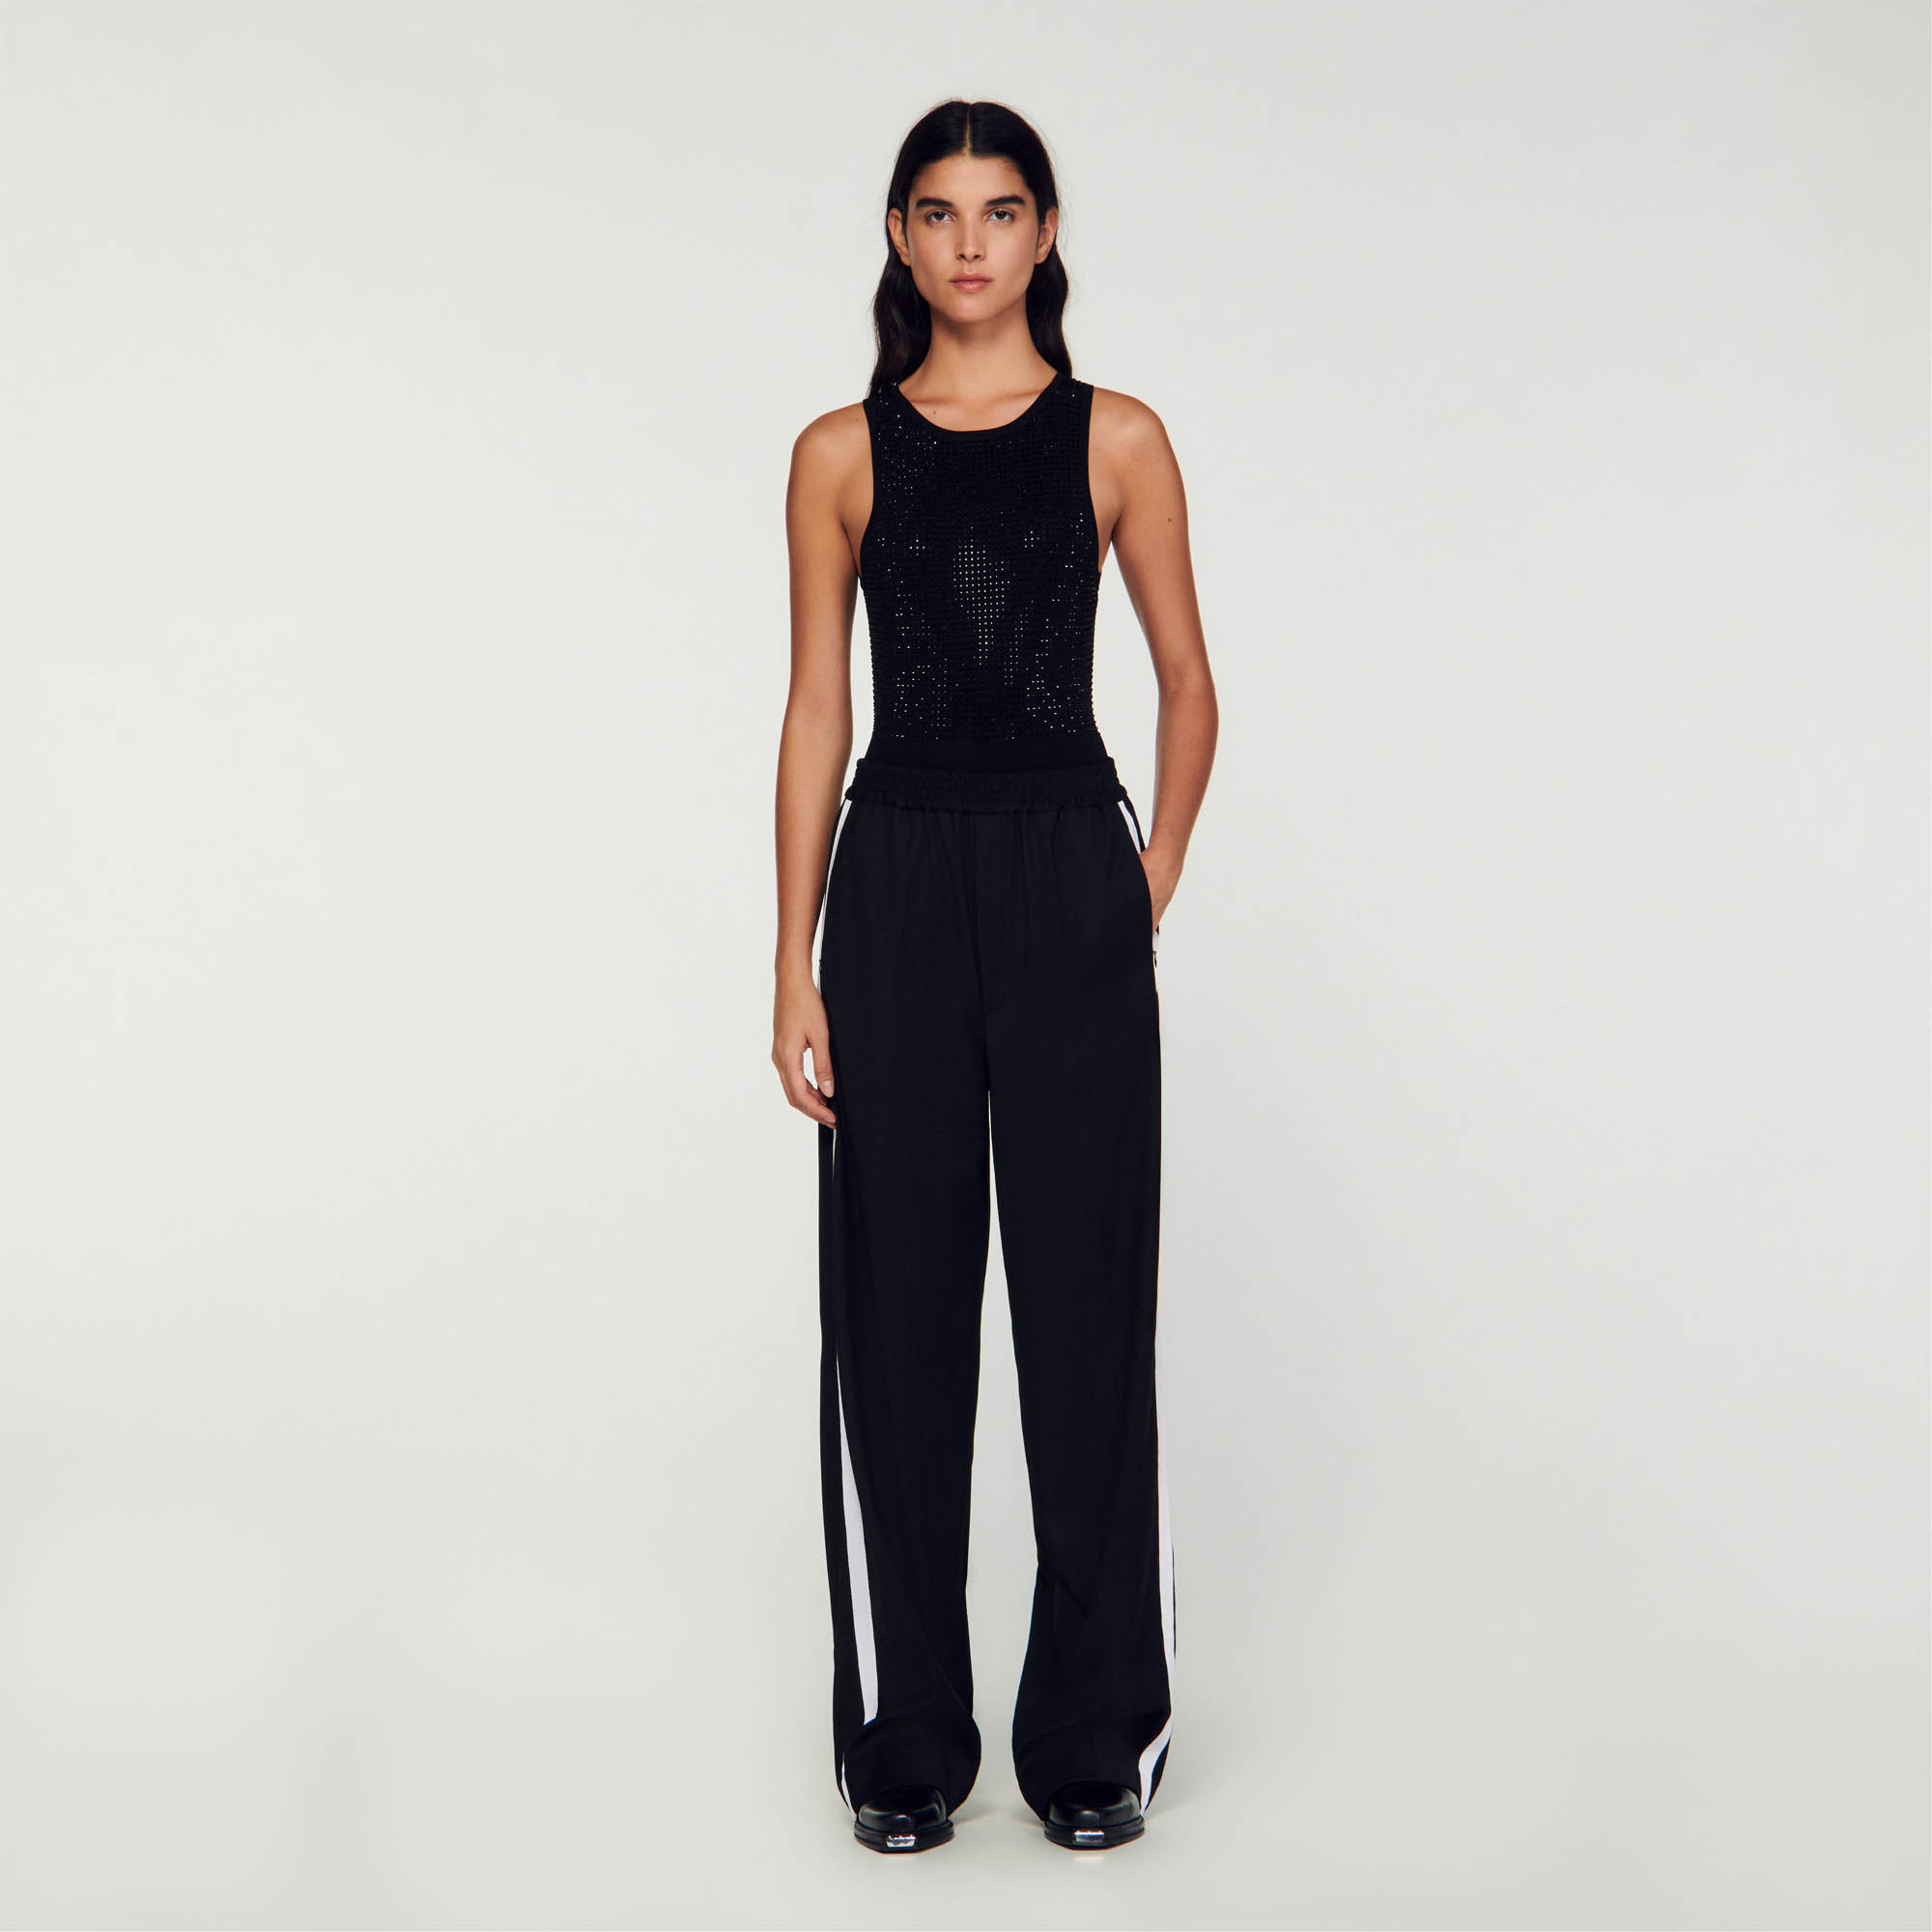 Sandro viscose Sleeveless knit bodysuit embellished with rhinestones featuring a round neck and a button placket